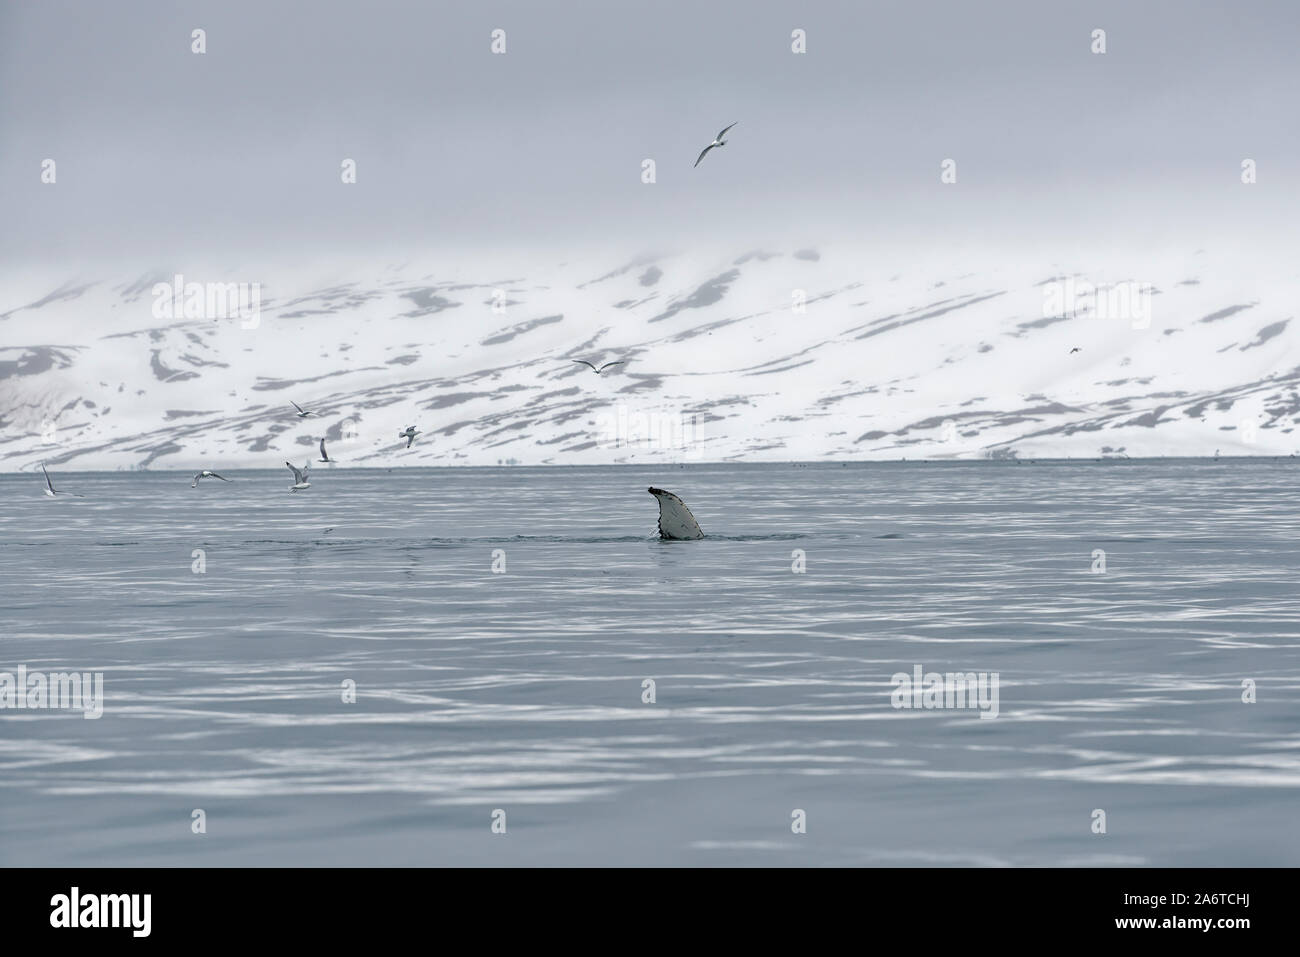 View of a blue whale (Balaenoptera musculus) near the coast of Spitsbergen, Svalbard, Norway Stock Photo